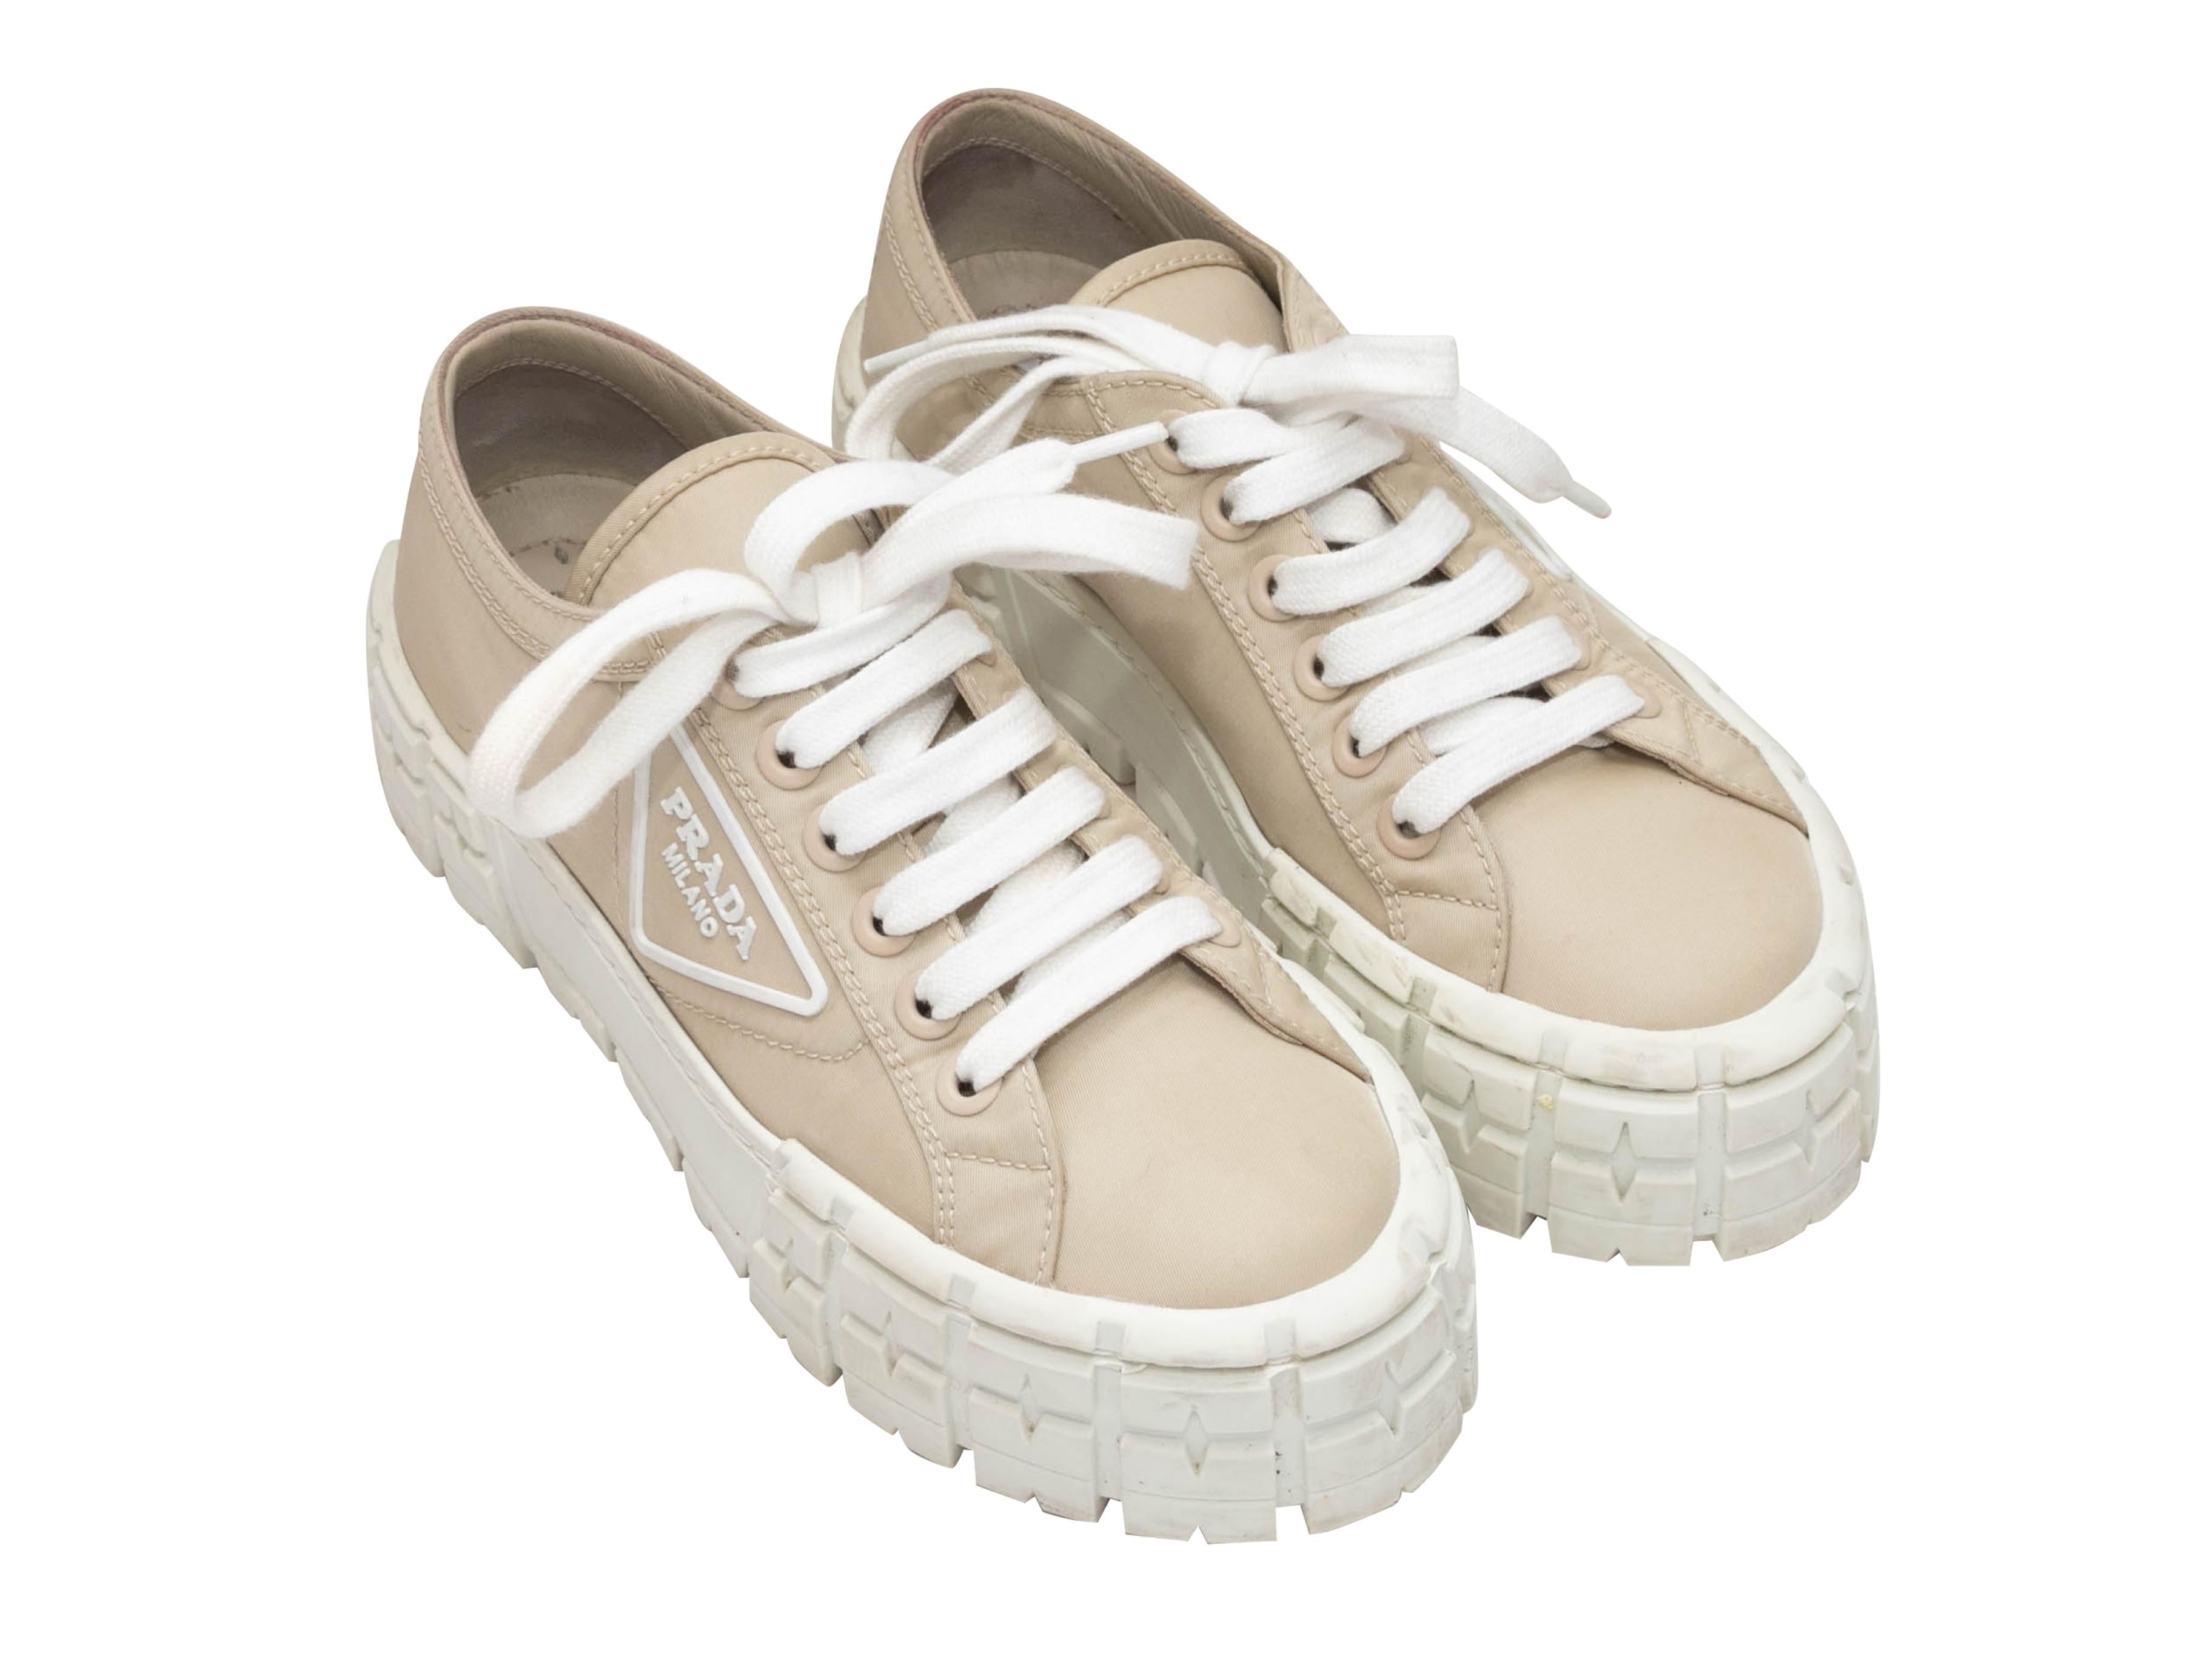 Beige and white Double Wheel Re-Nylon platform sneakers by Prada. Rubber soles. Lace-up tie closures at tops. 2